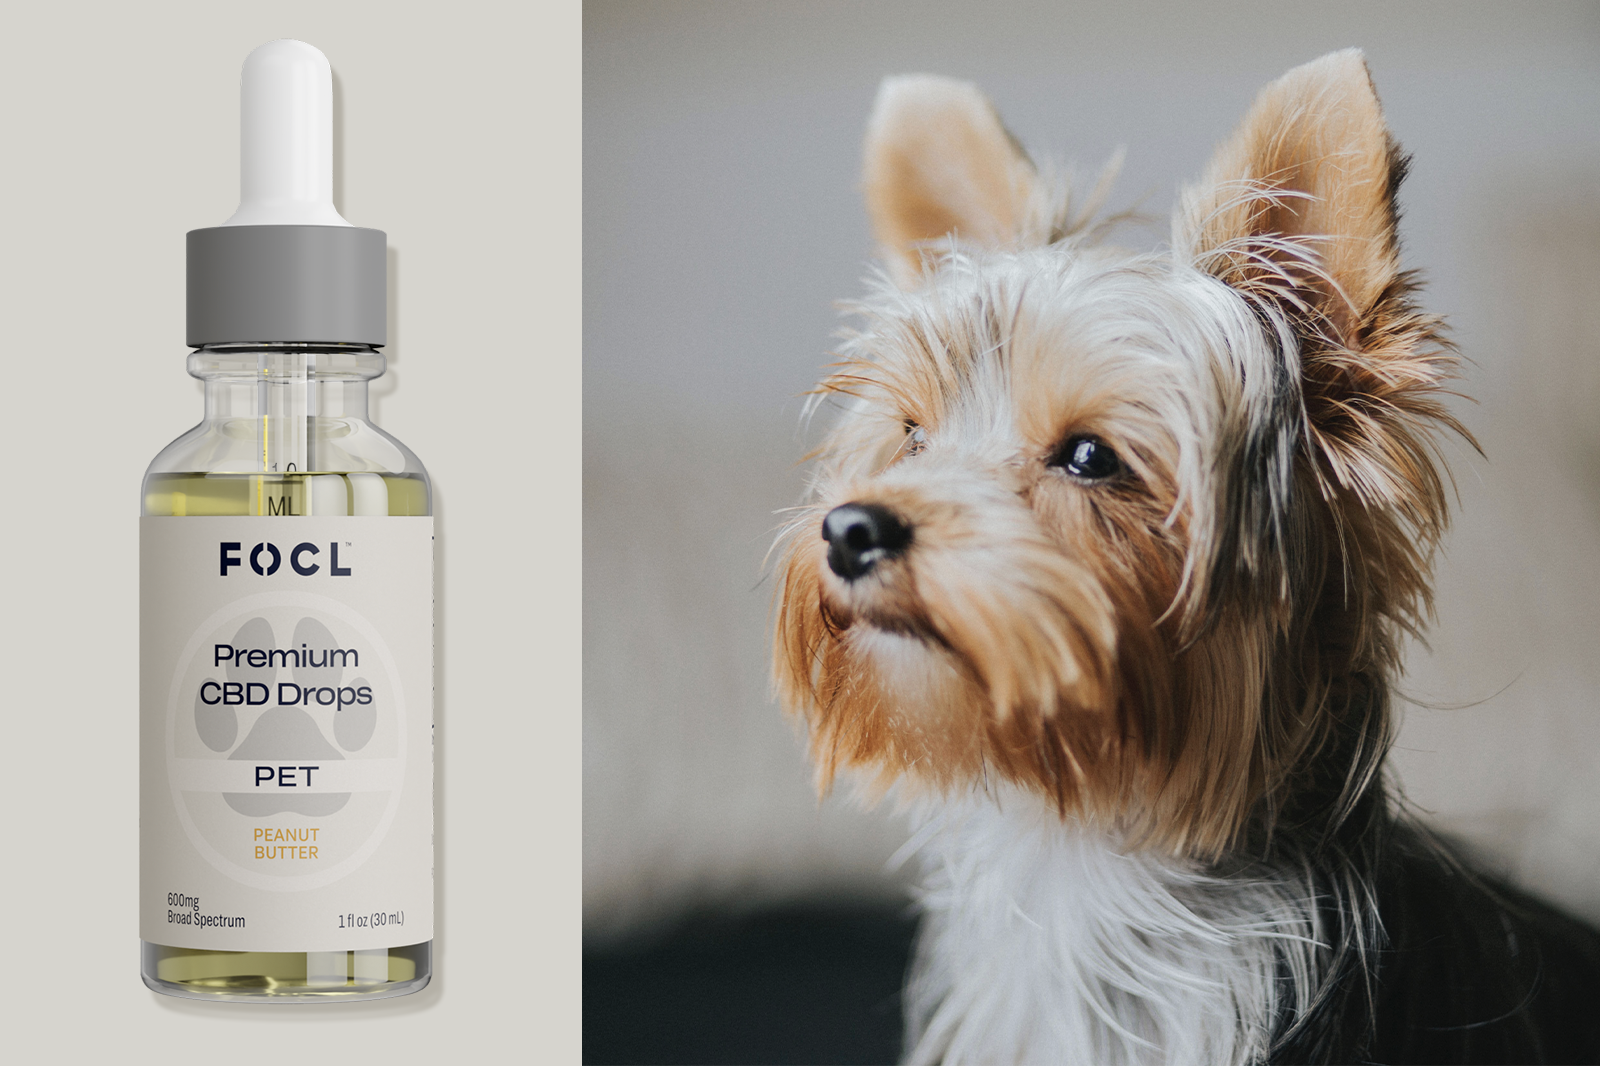 Bottle of FOCL Premium CBD Drops and a yorkie.